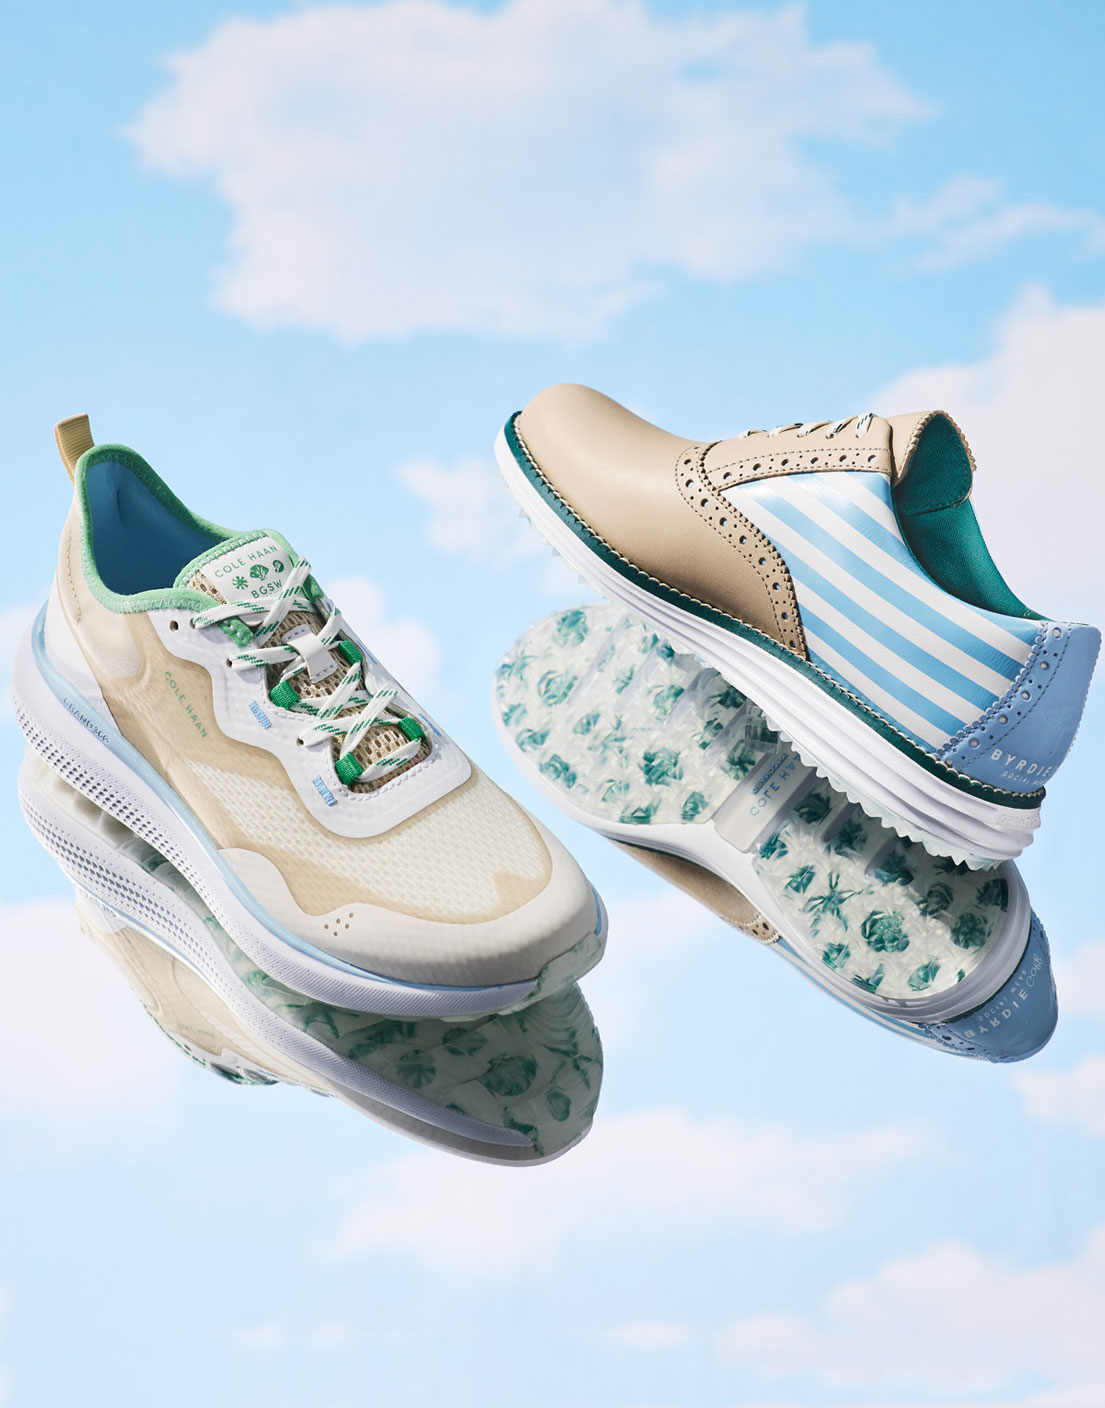 Cole Haan x Byrdie Golf Social Wear Bring Vintage Style to the Course